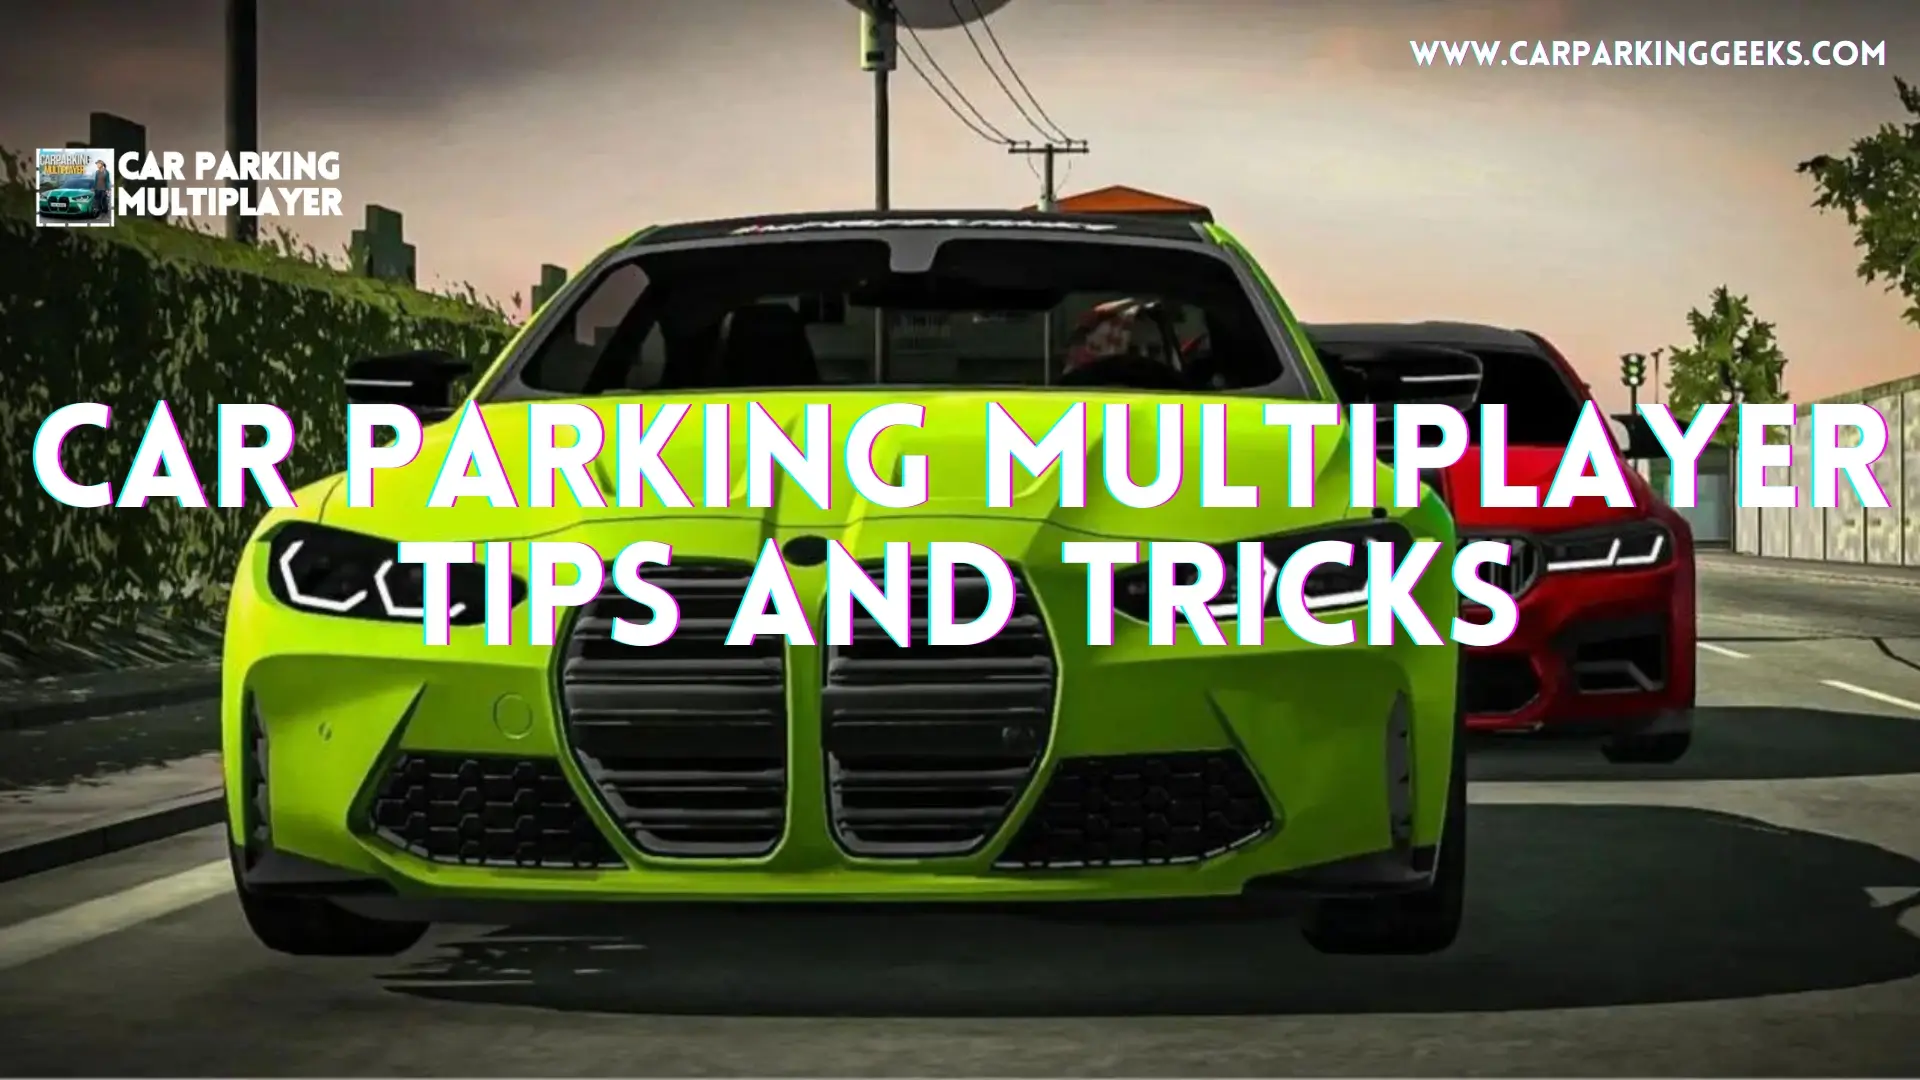 Car Parking Multiplayer Tips and Tricks